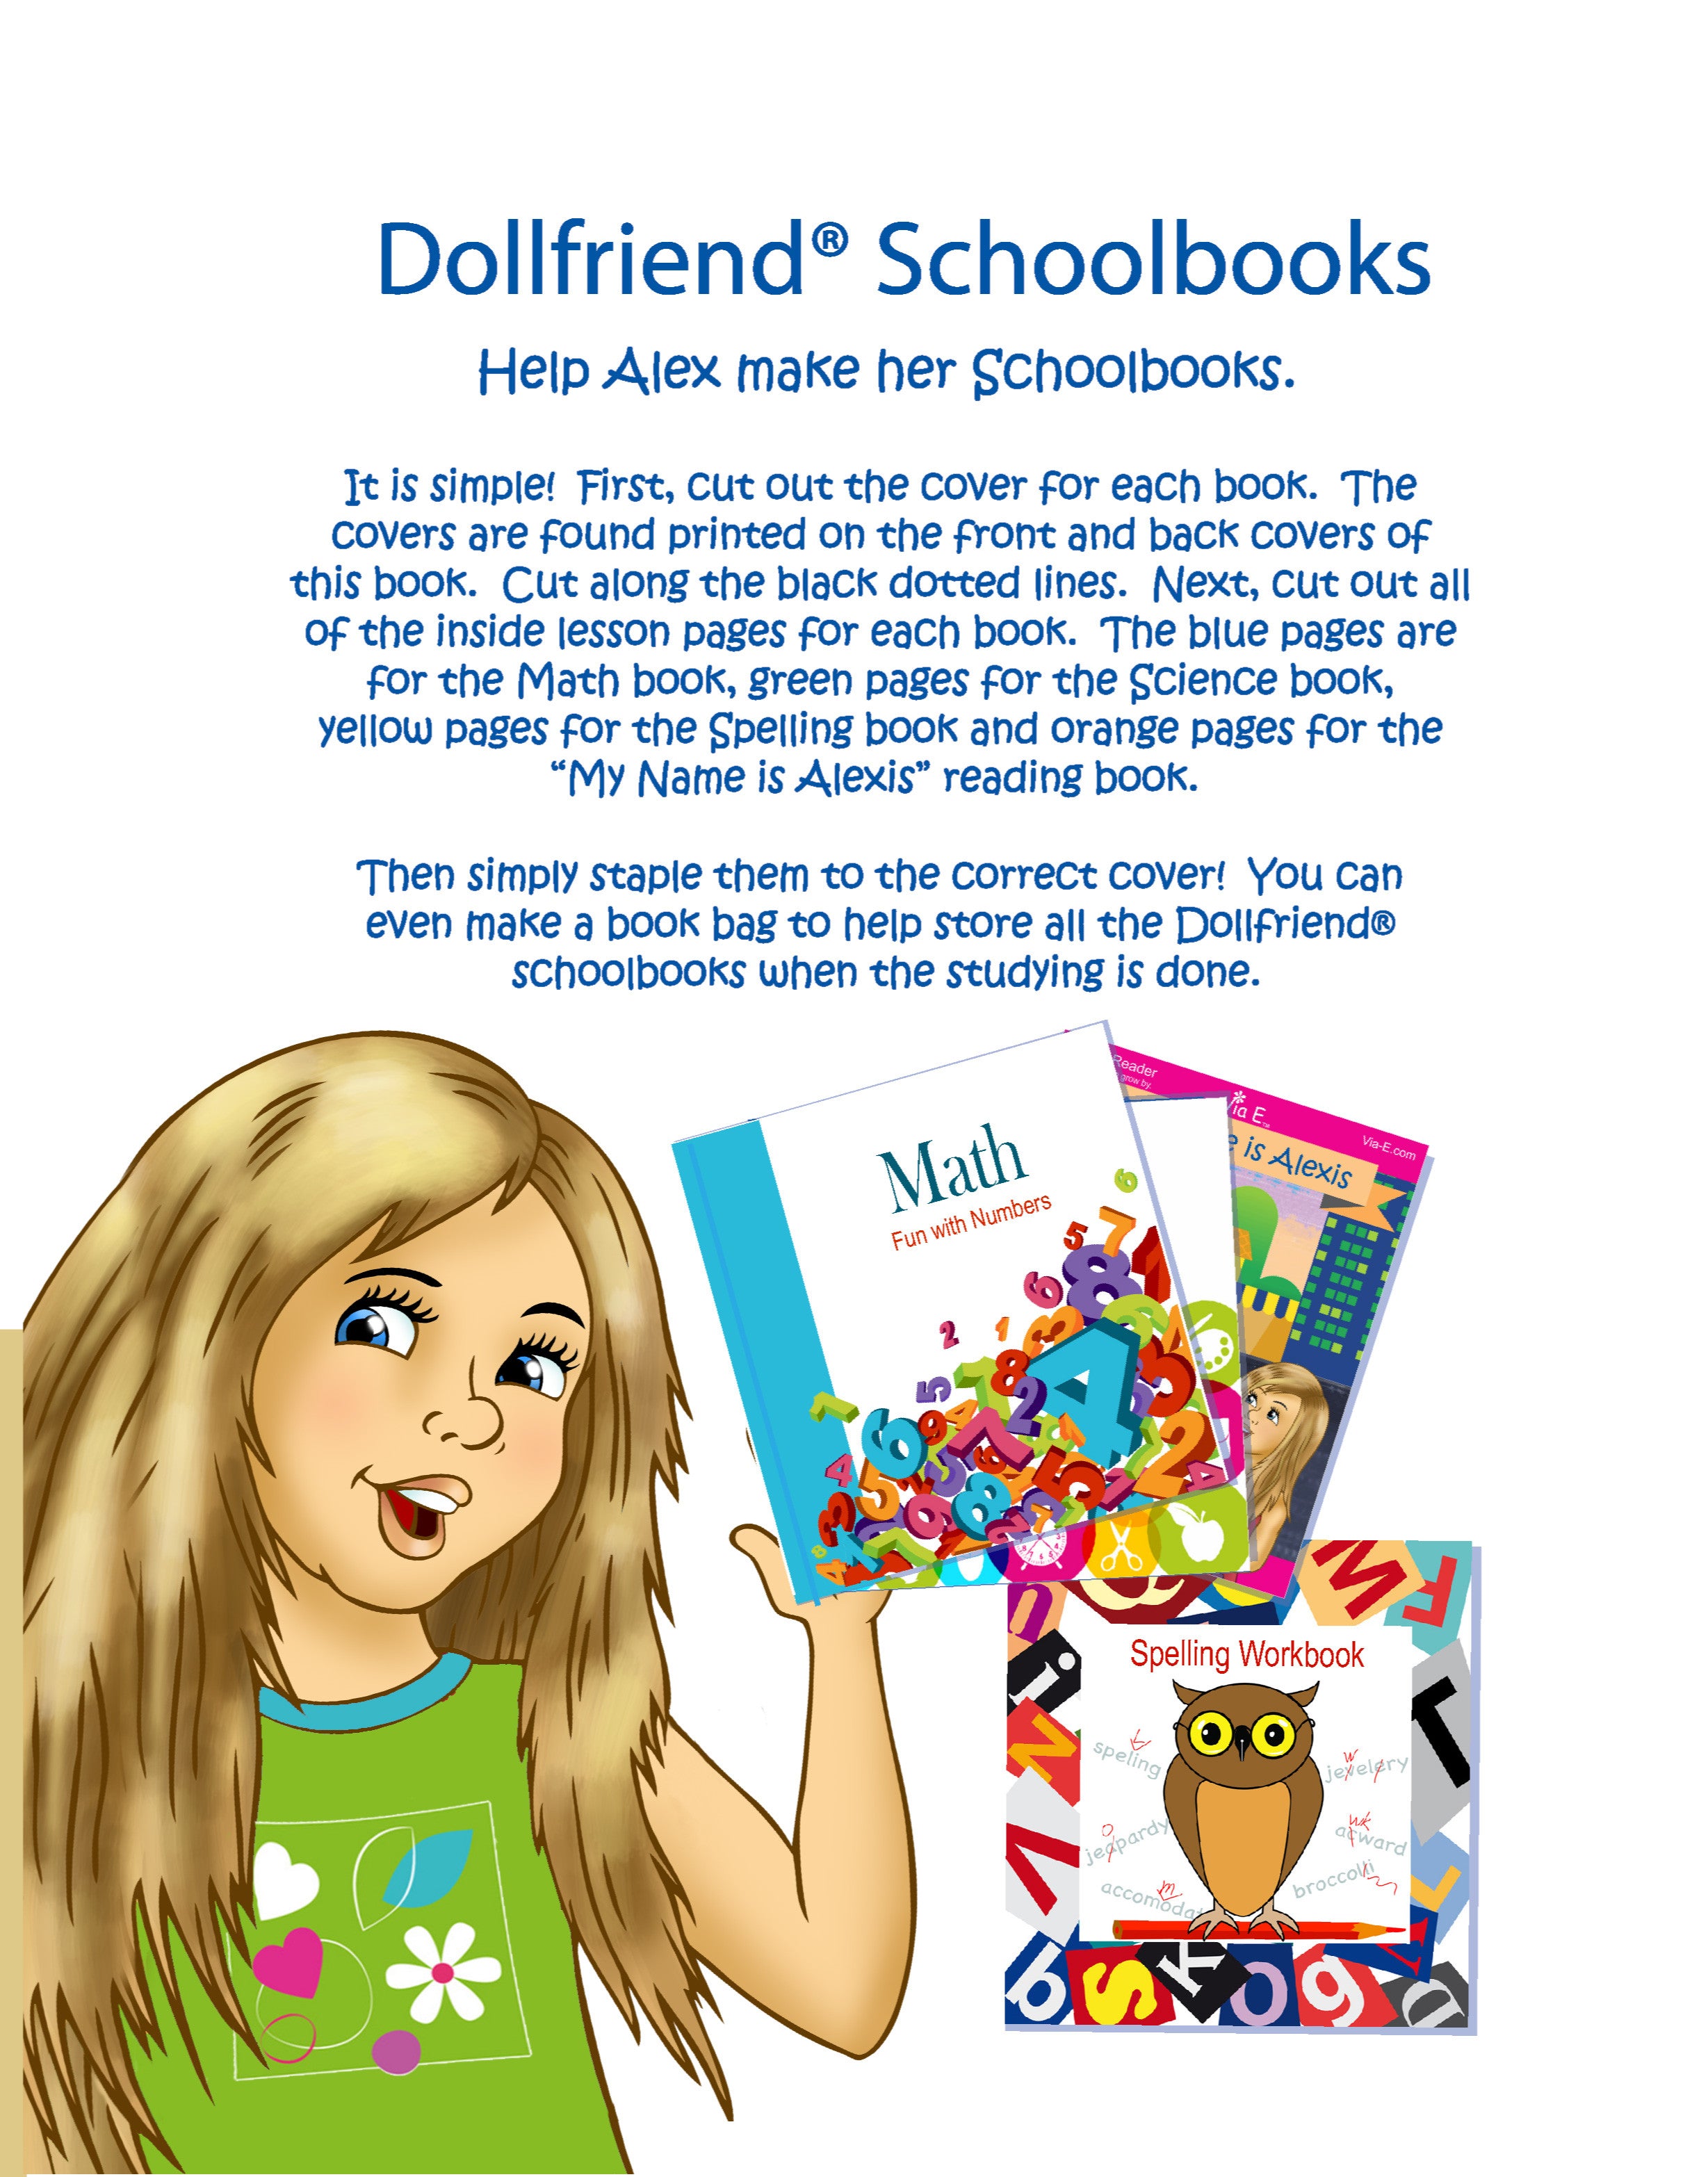 My Schoolbooks - Accessory Activity for Girls and Dollfriends(R)